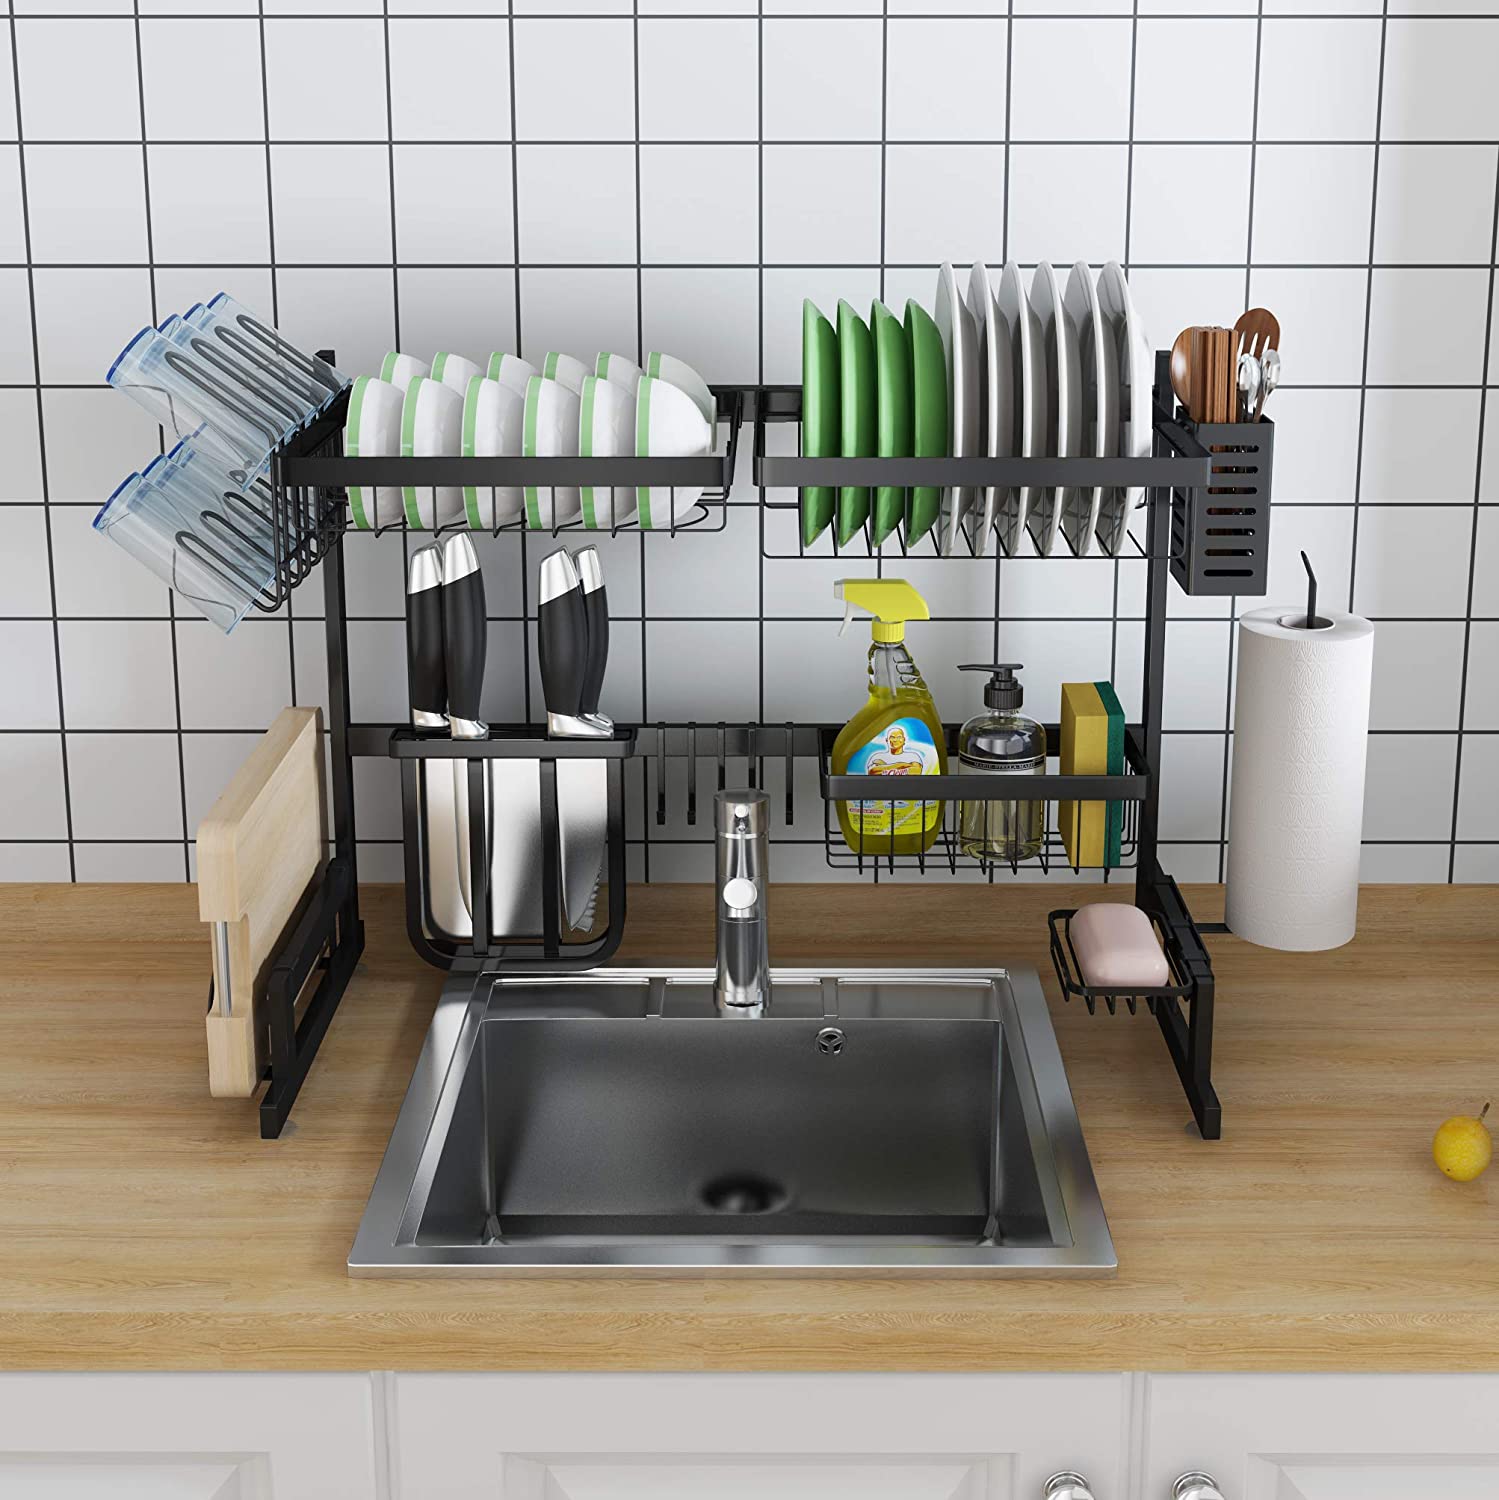 Skywin Kitchen Dish Rack Over Sink - Dish Rack for Counter Over